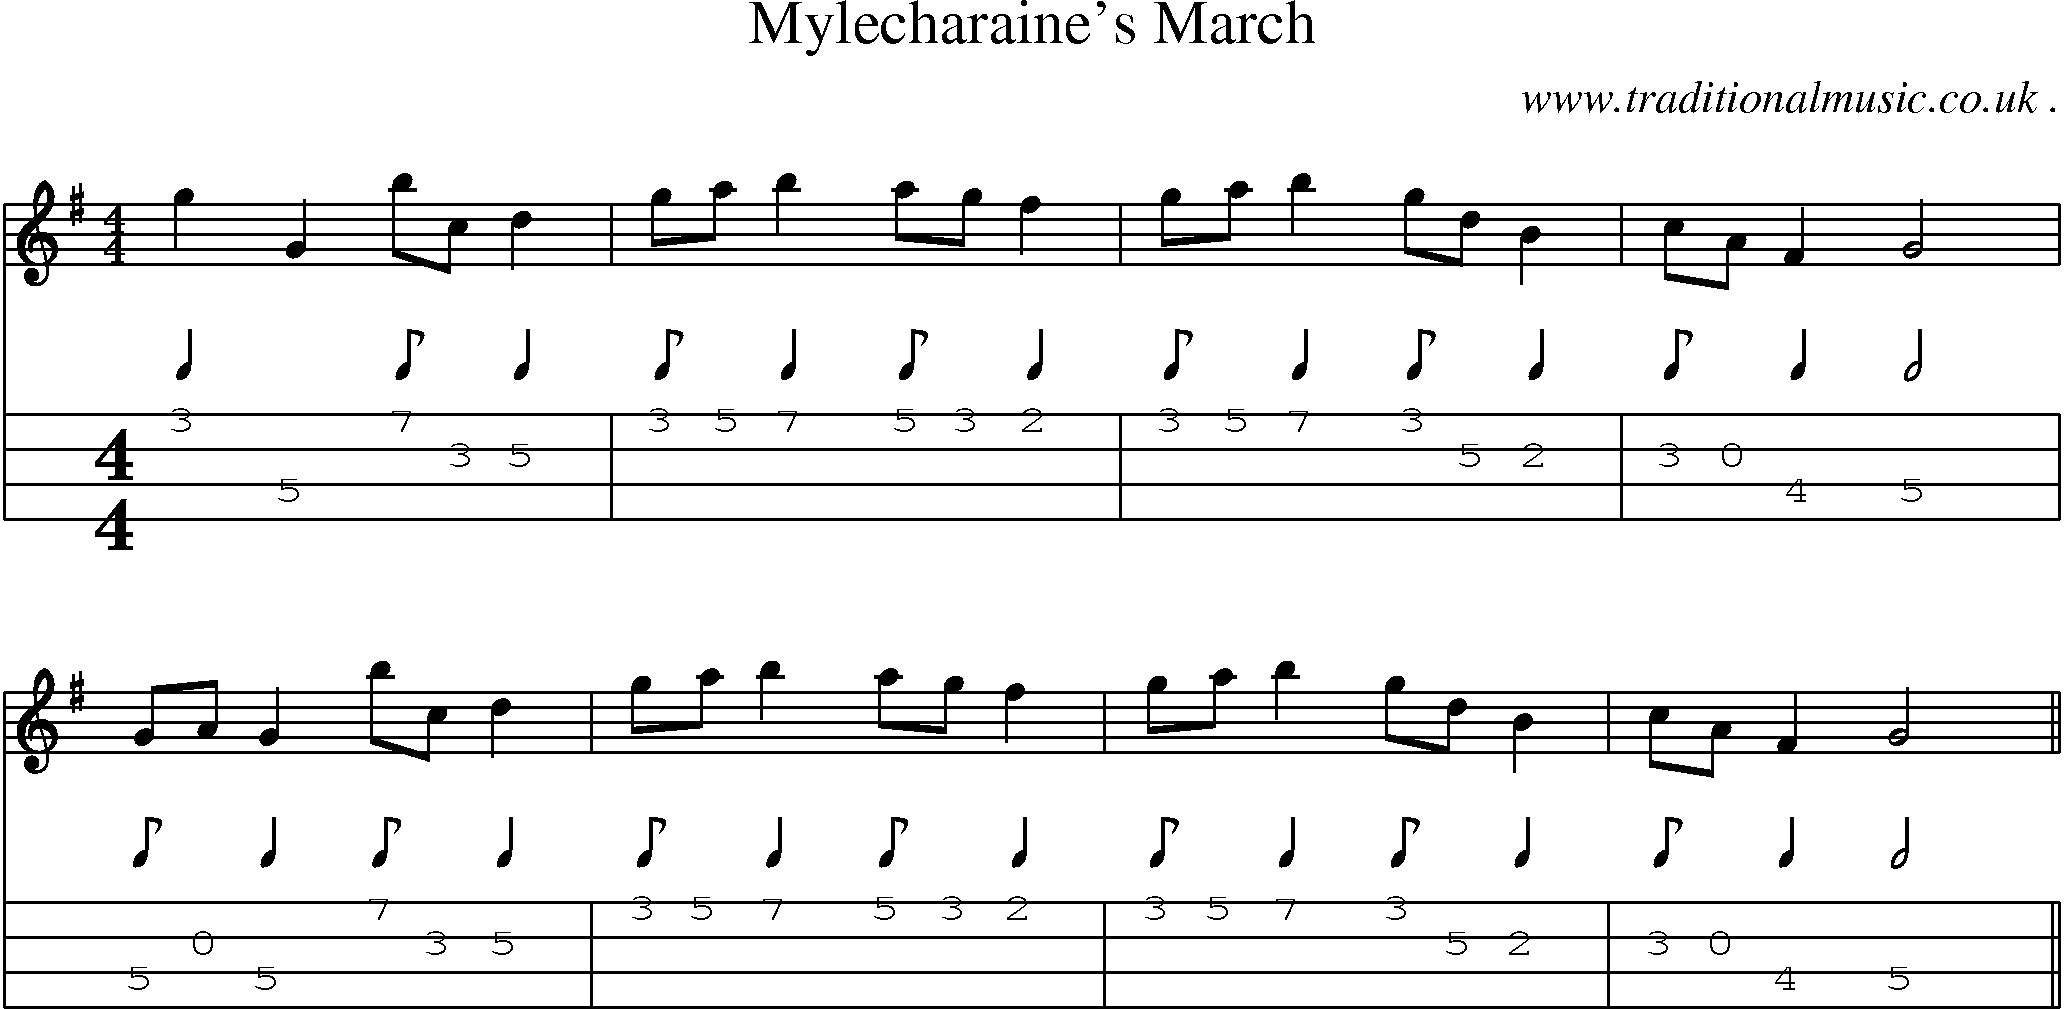 Sheet-Music and Mandolin Tabs for Mylecharaines March